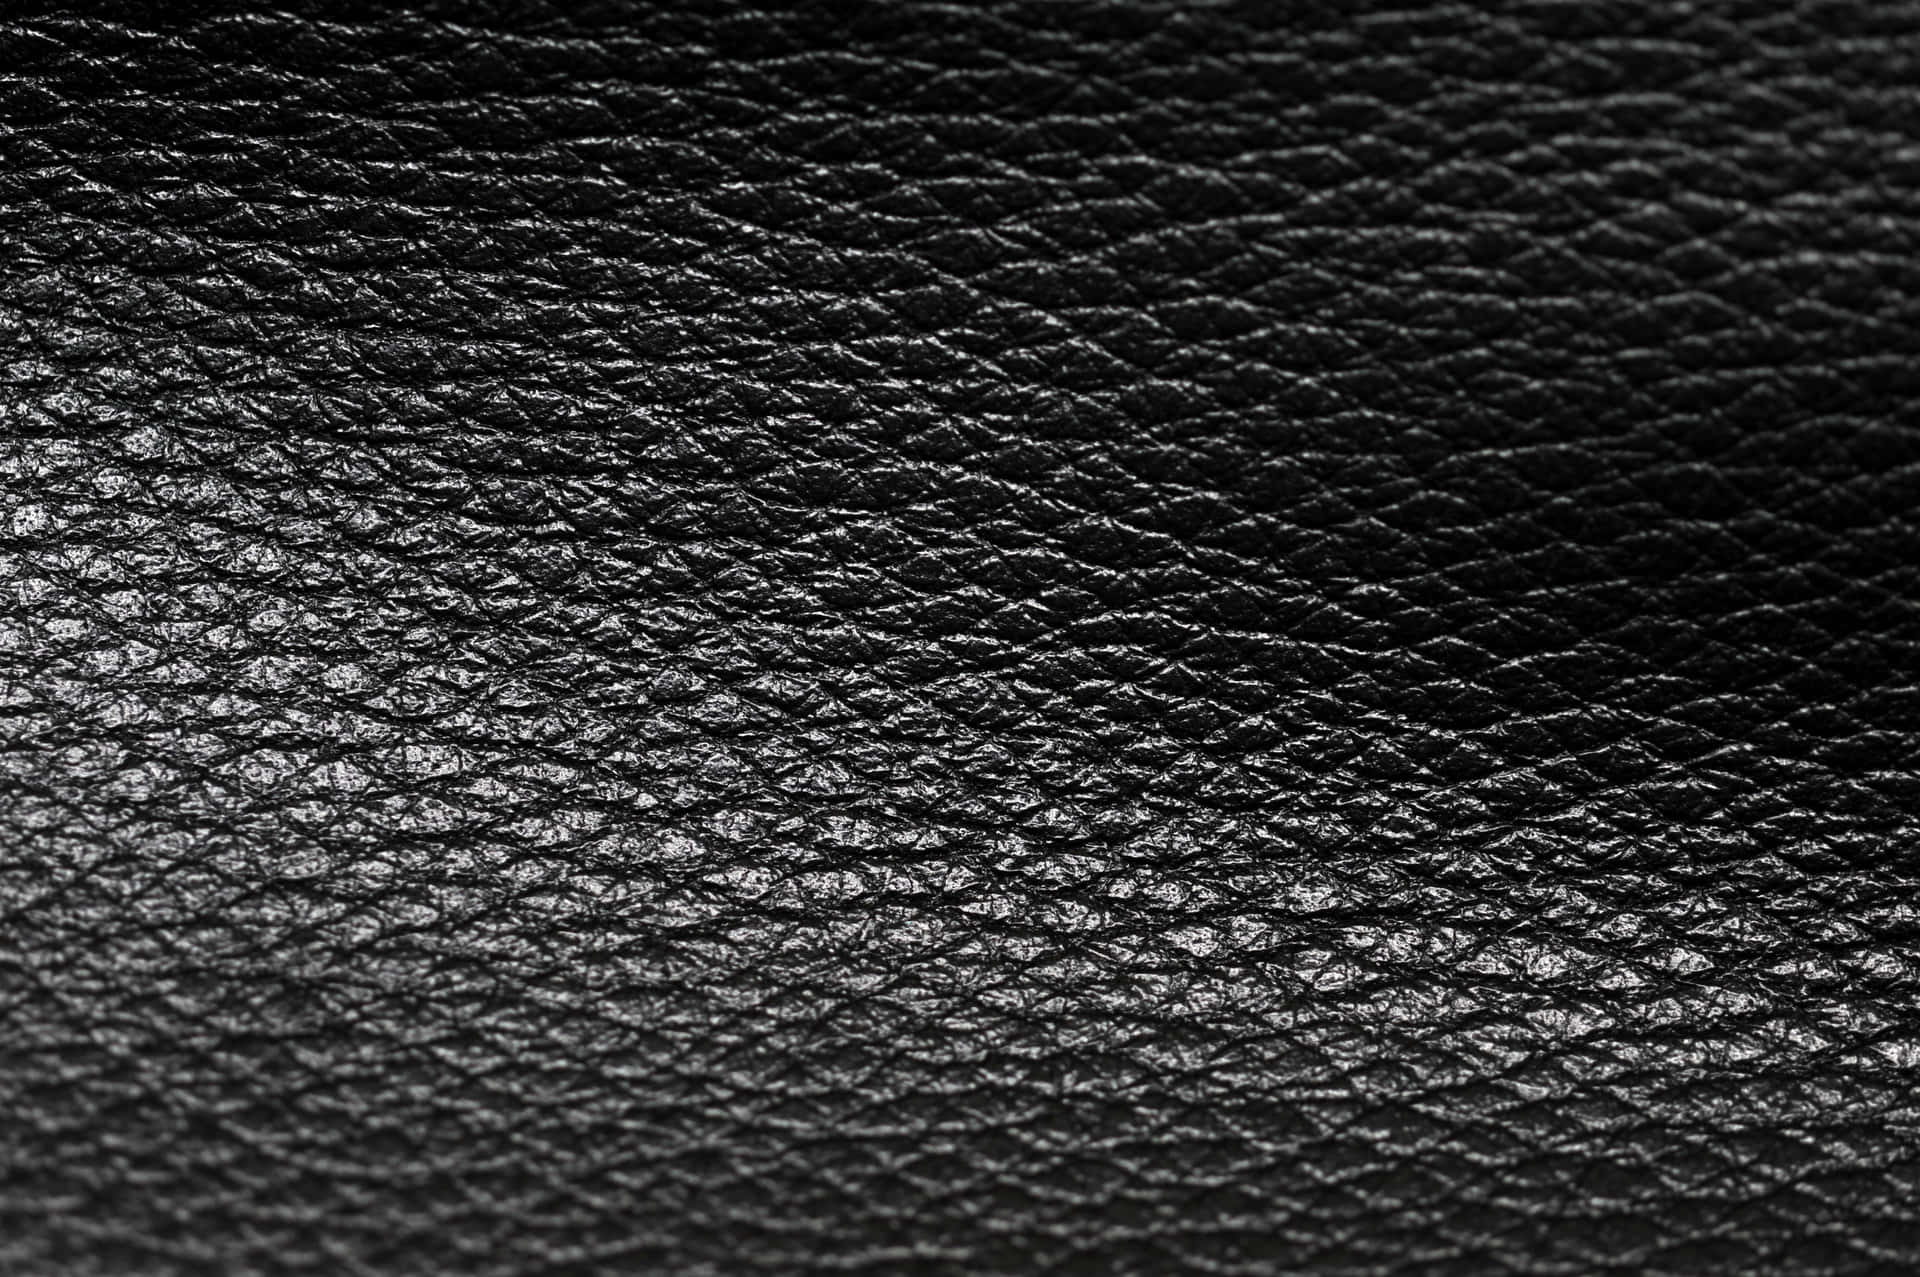 Download A Close Up Of A Black Leather Texture | Wallpapers.com